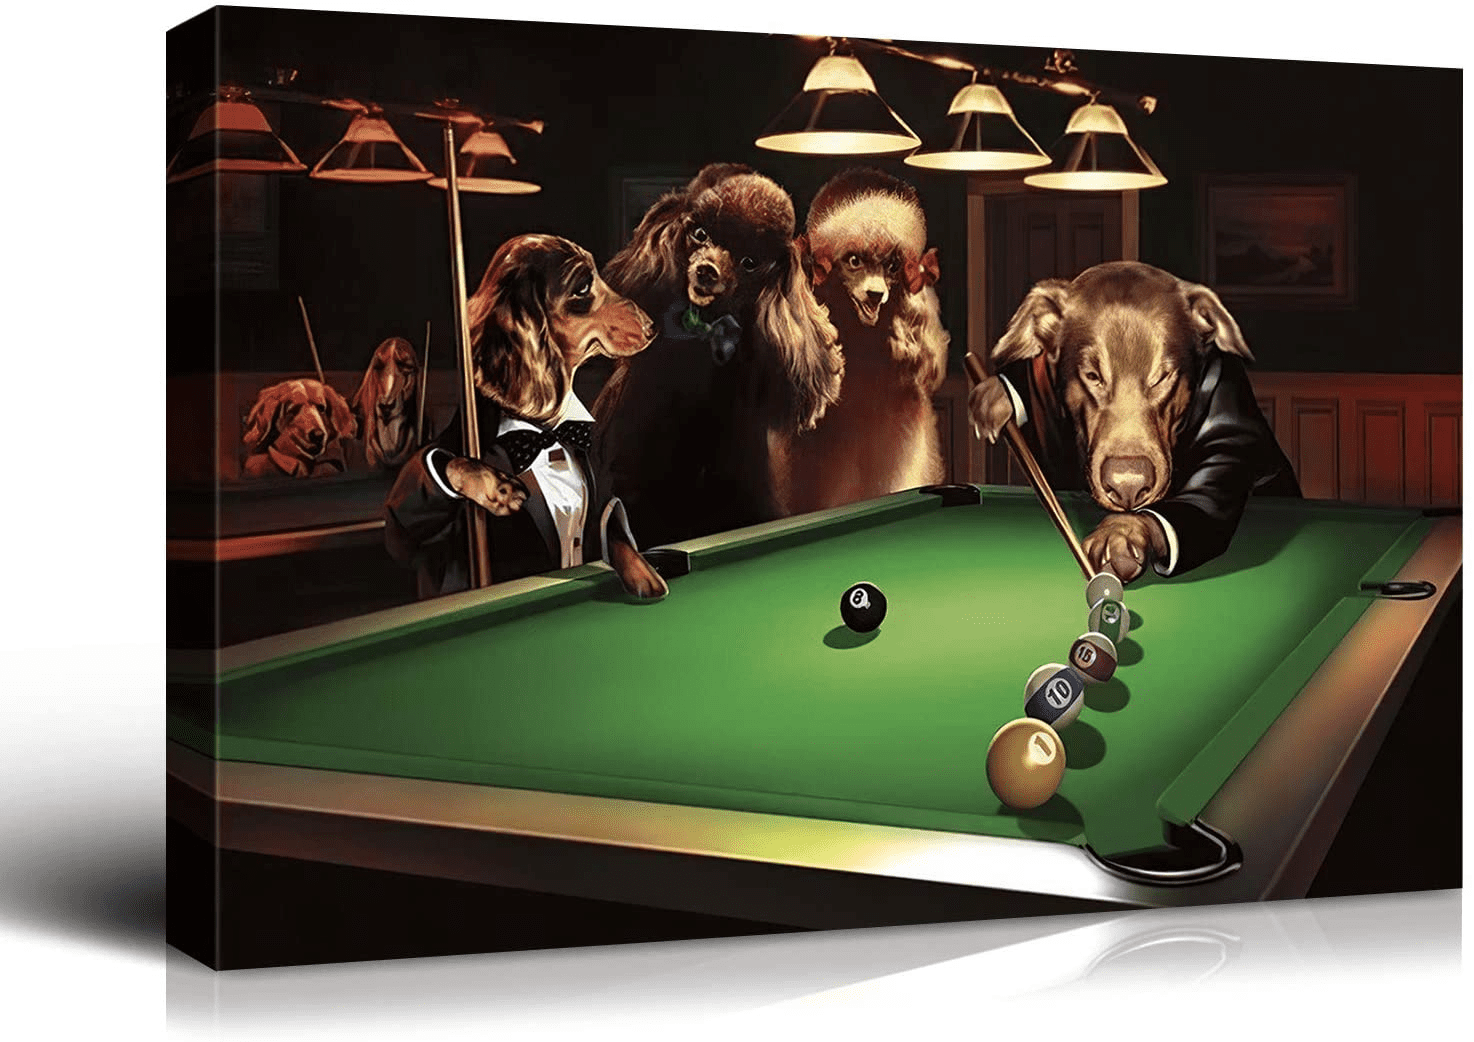 12"x20"Billiard beauty Painting HD Print on Canvas Home Decor Wall Art Picture